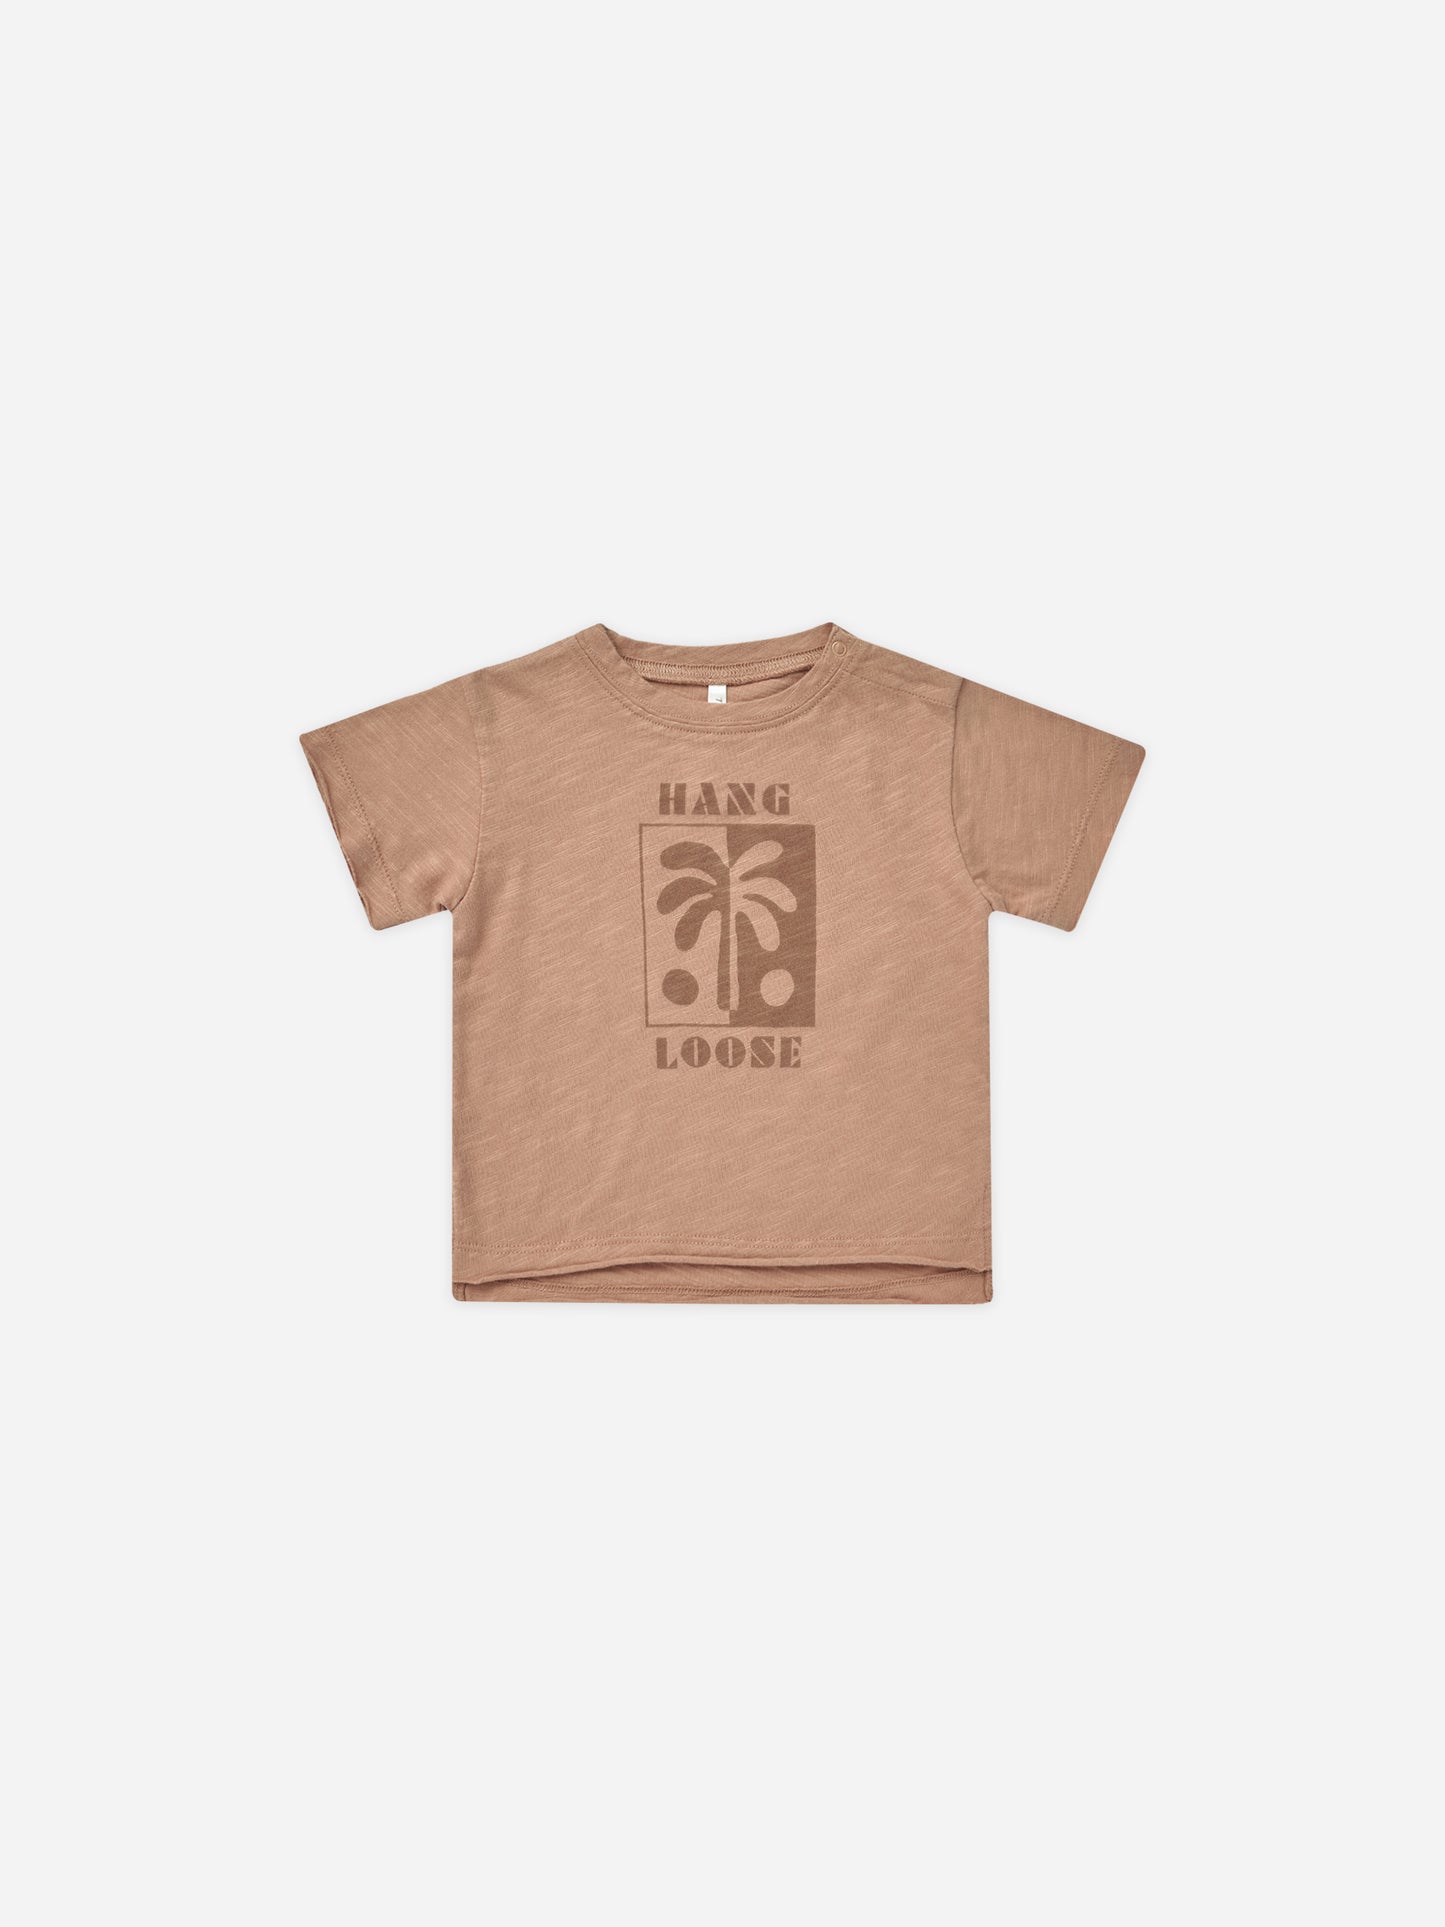 Raw Edge Tee || Hang Loose - Rylee + Cru | Kids Clothes | Trendy Baby Clothes | Modern Infant Outfits |